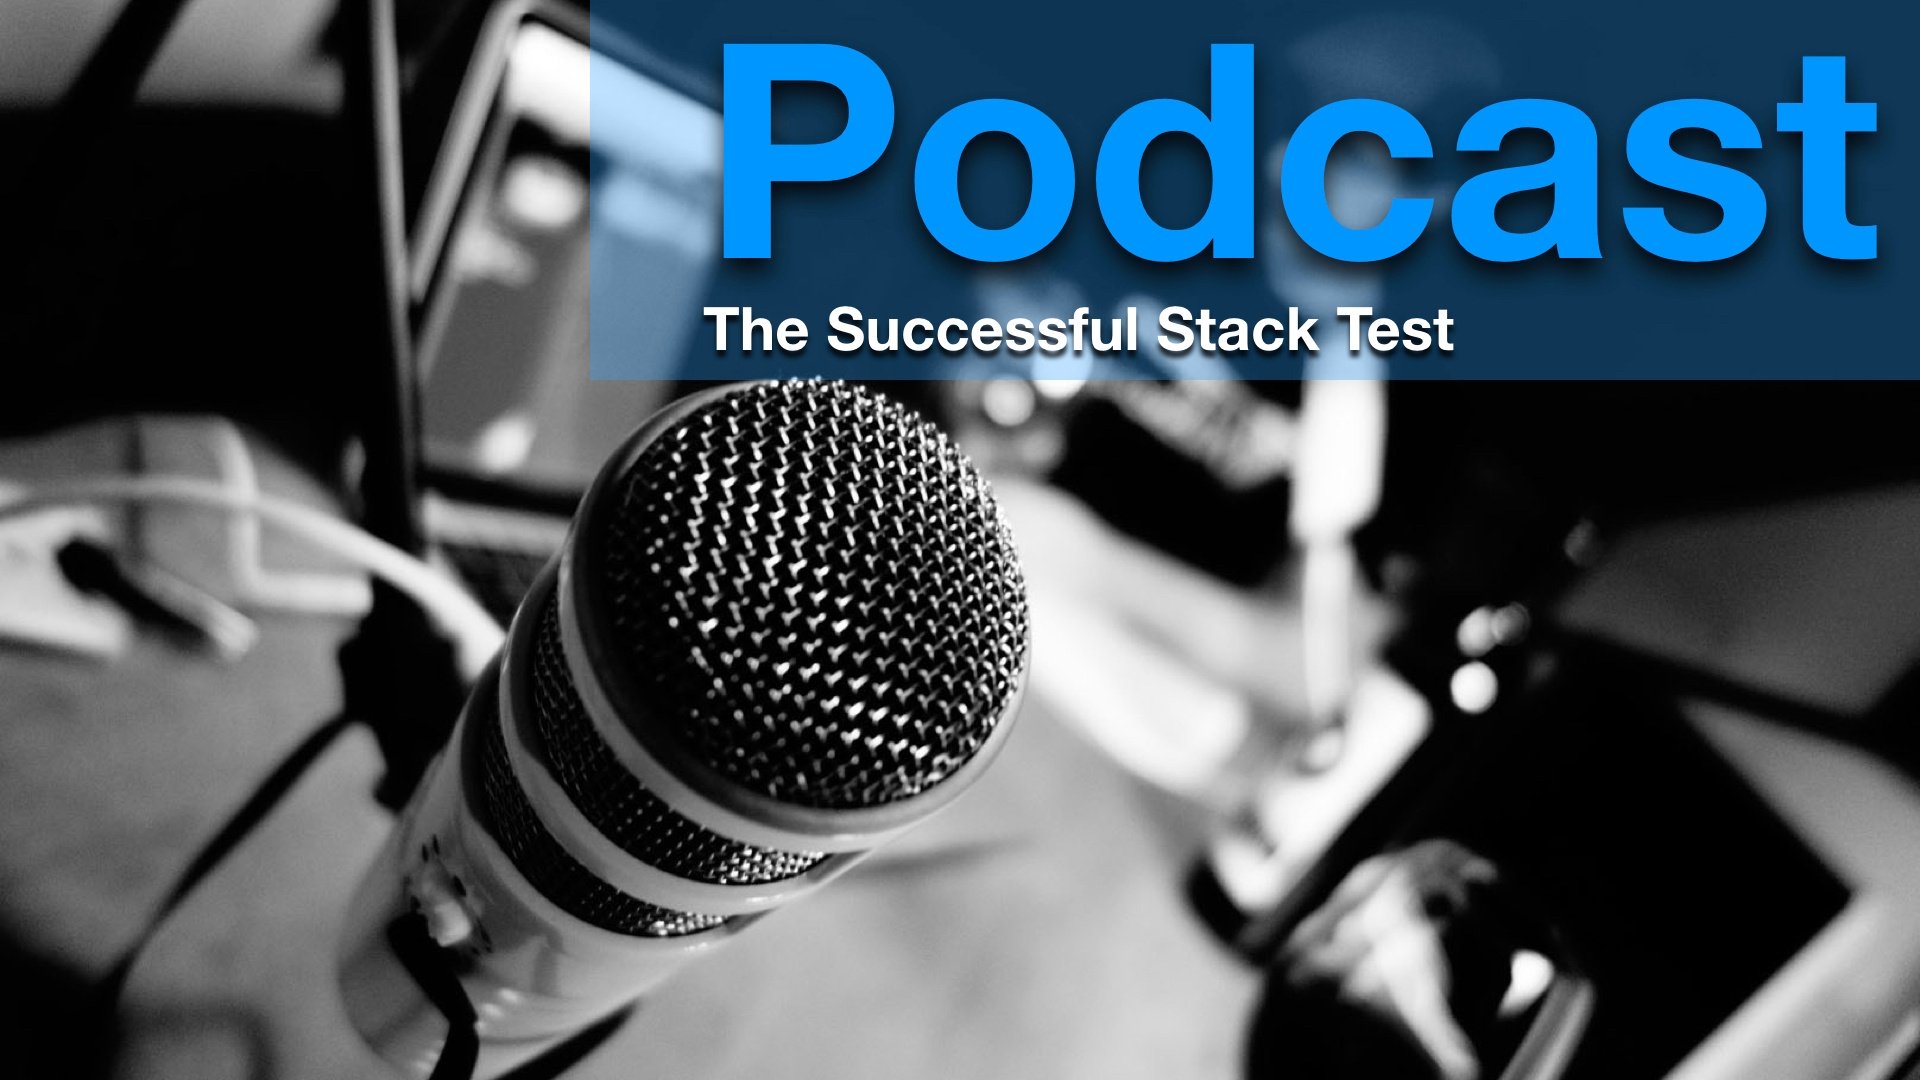 Jim Guenthoer: The Successful Stack Test